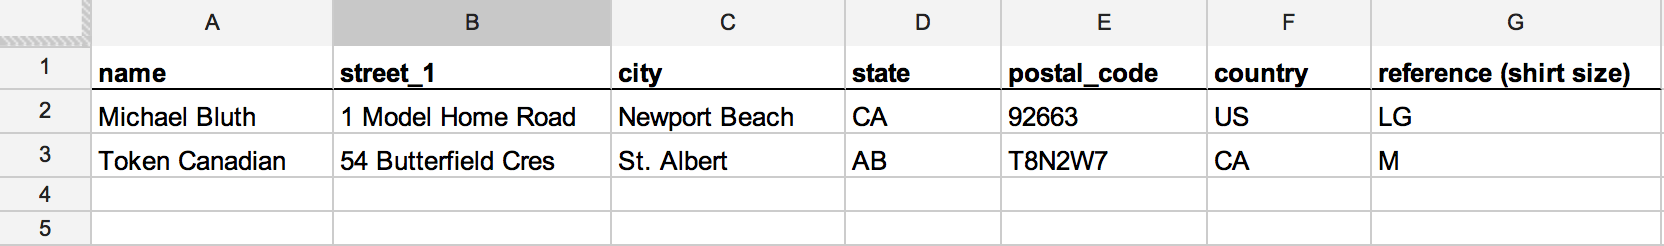 Table with example shipping information